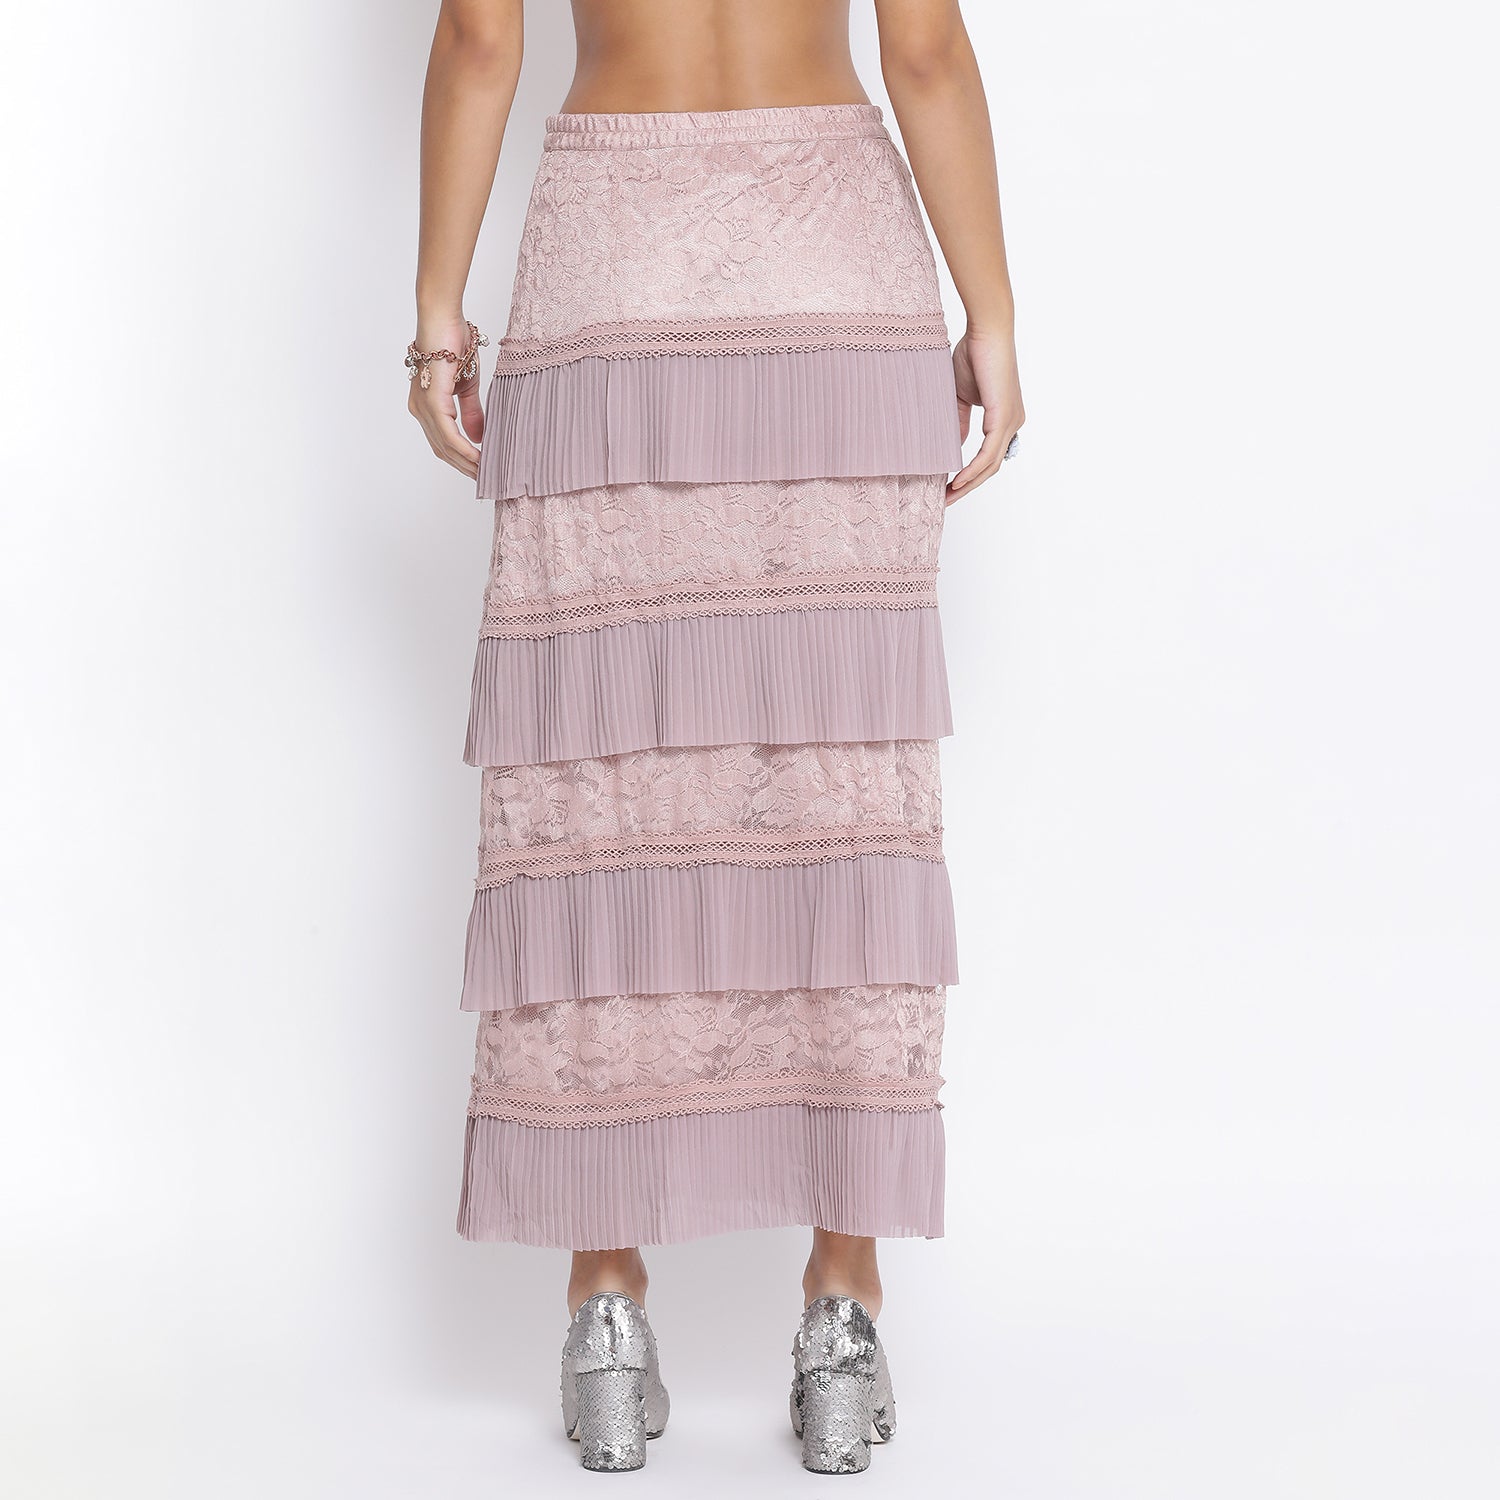 Rose Pink Net Frill Skirt With Lace